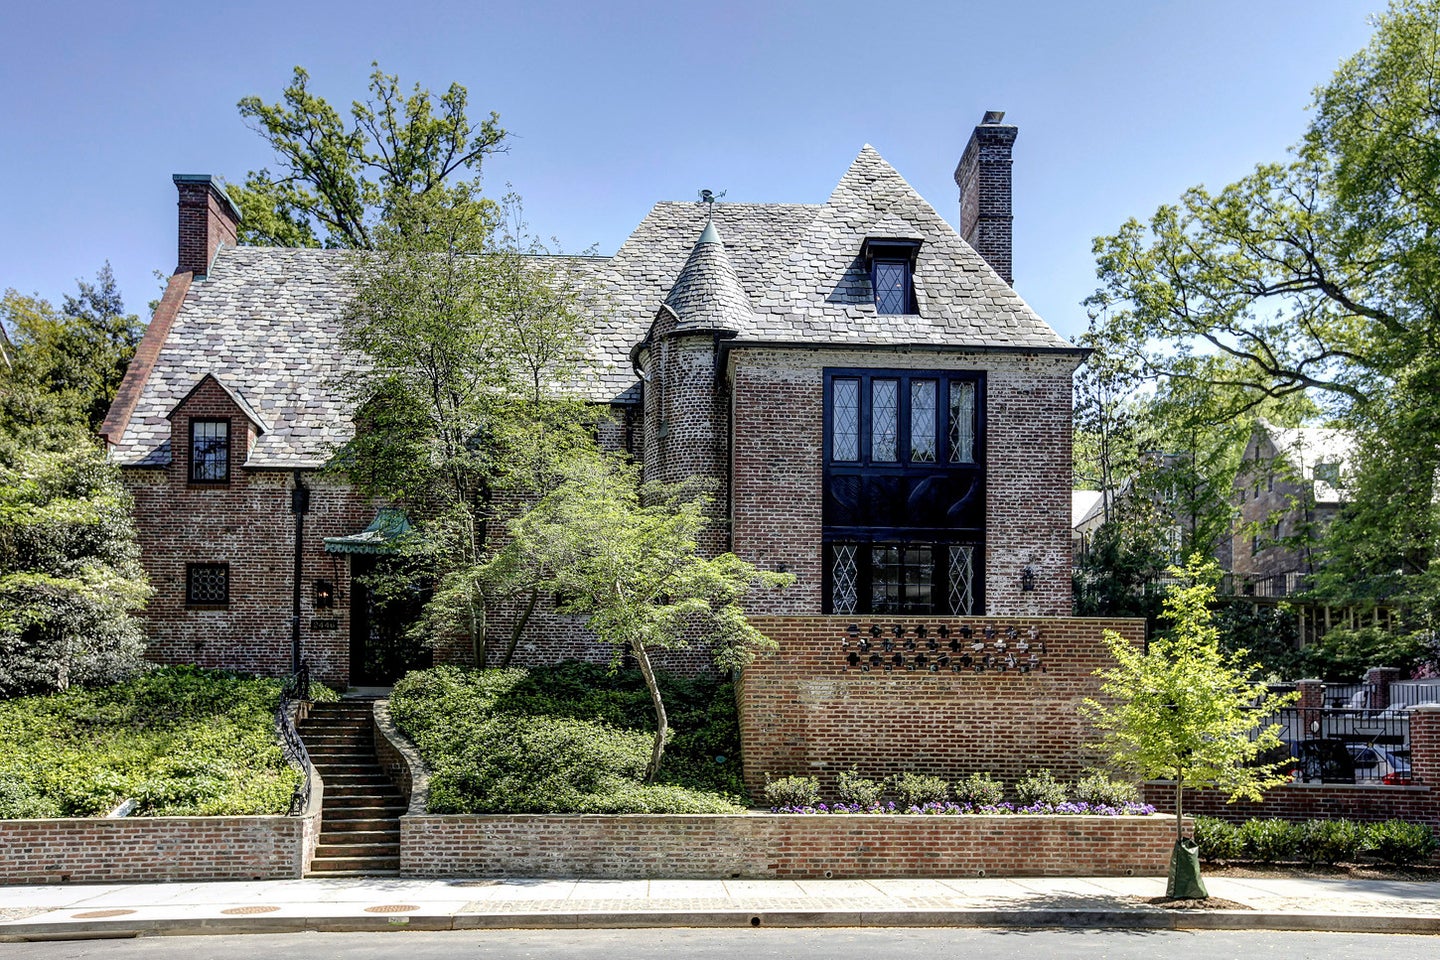 Obama Just Bought His D.C Rental Home